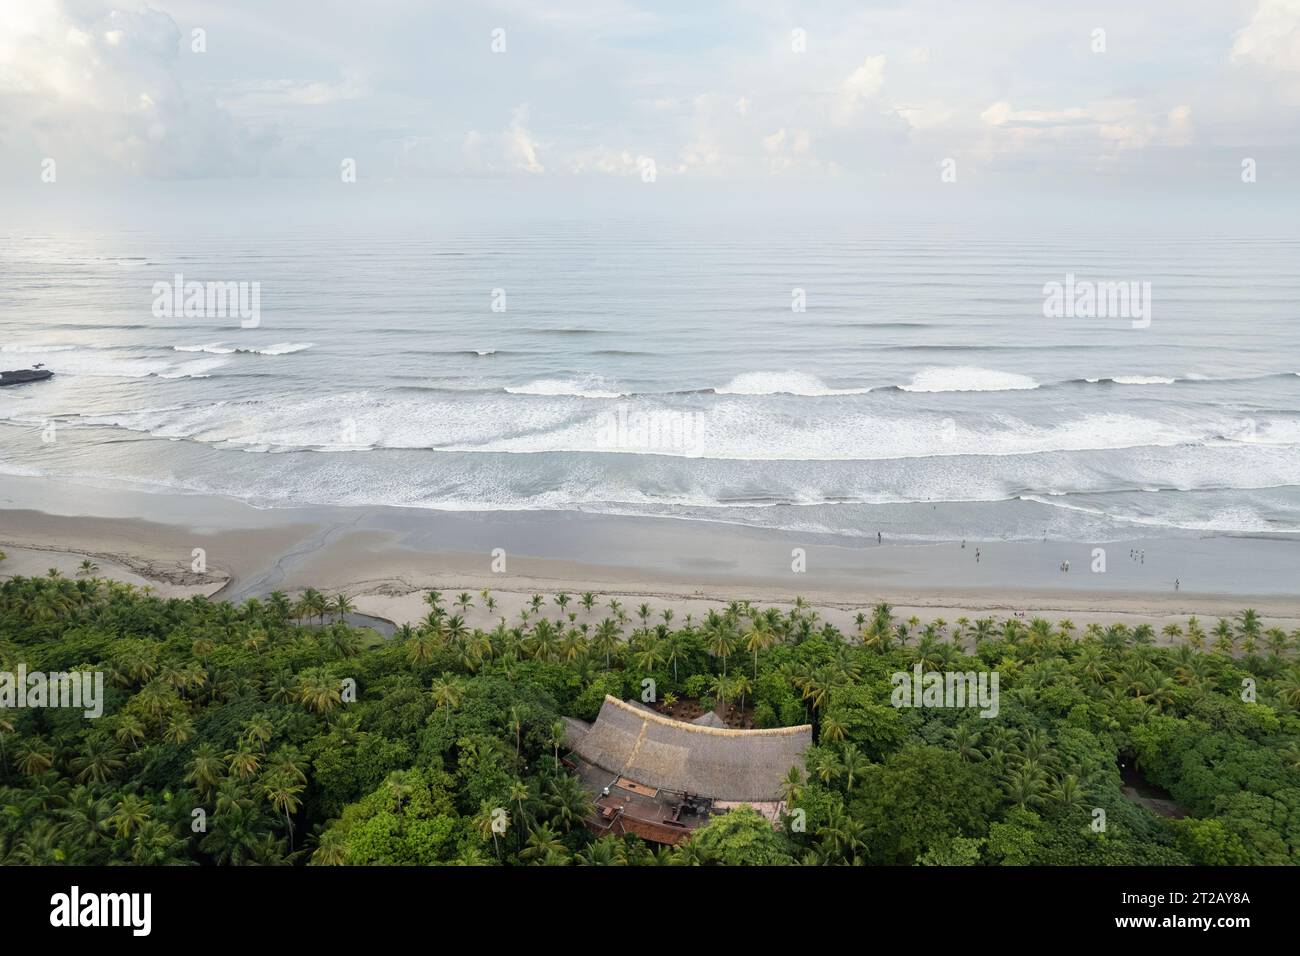 Sea coast with sandy beach and palm trees aerial drone view Stock Photo